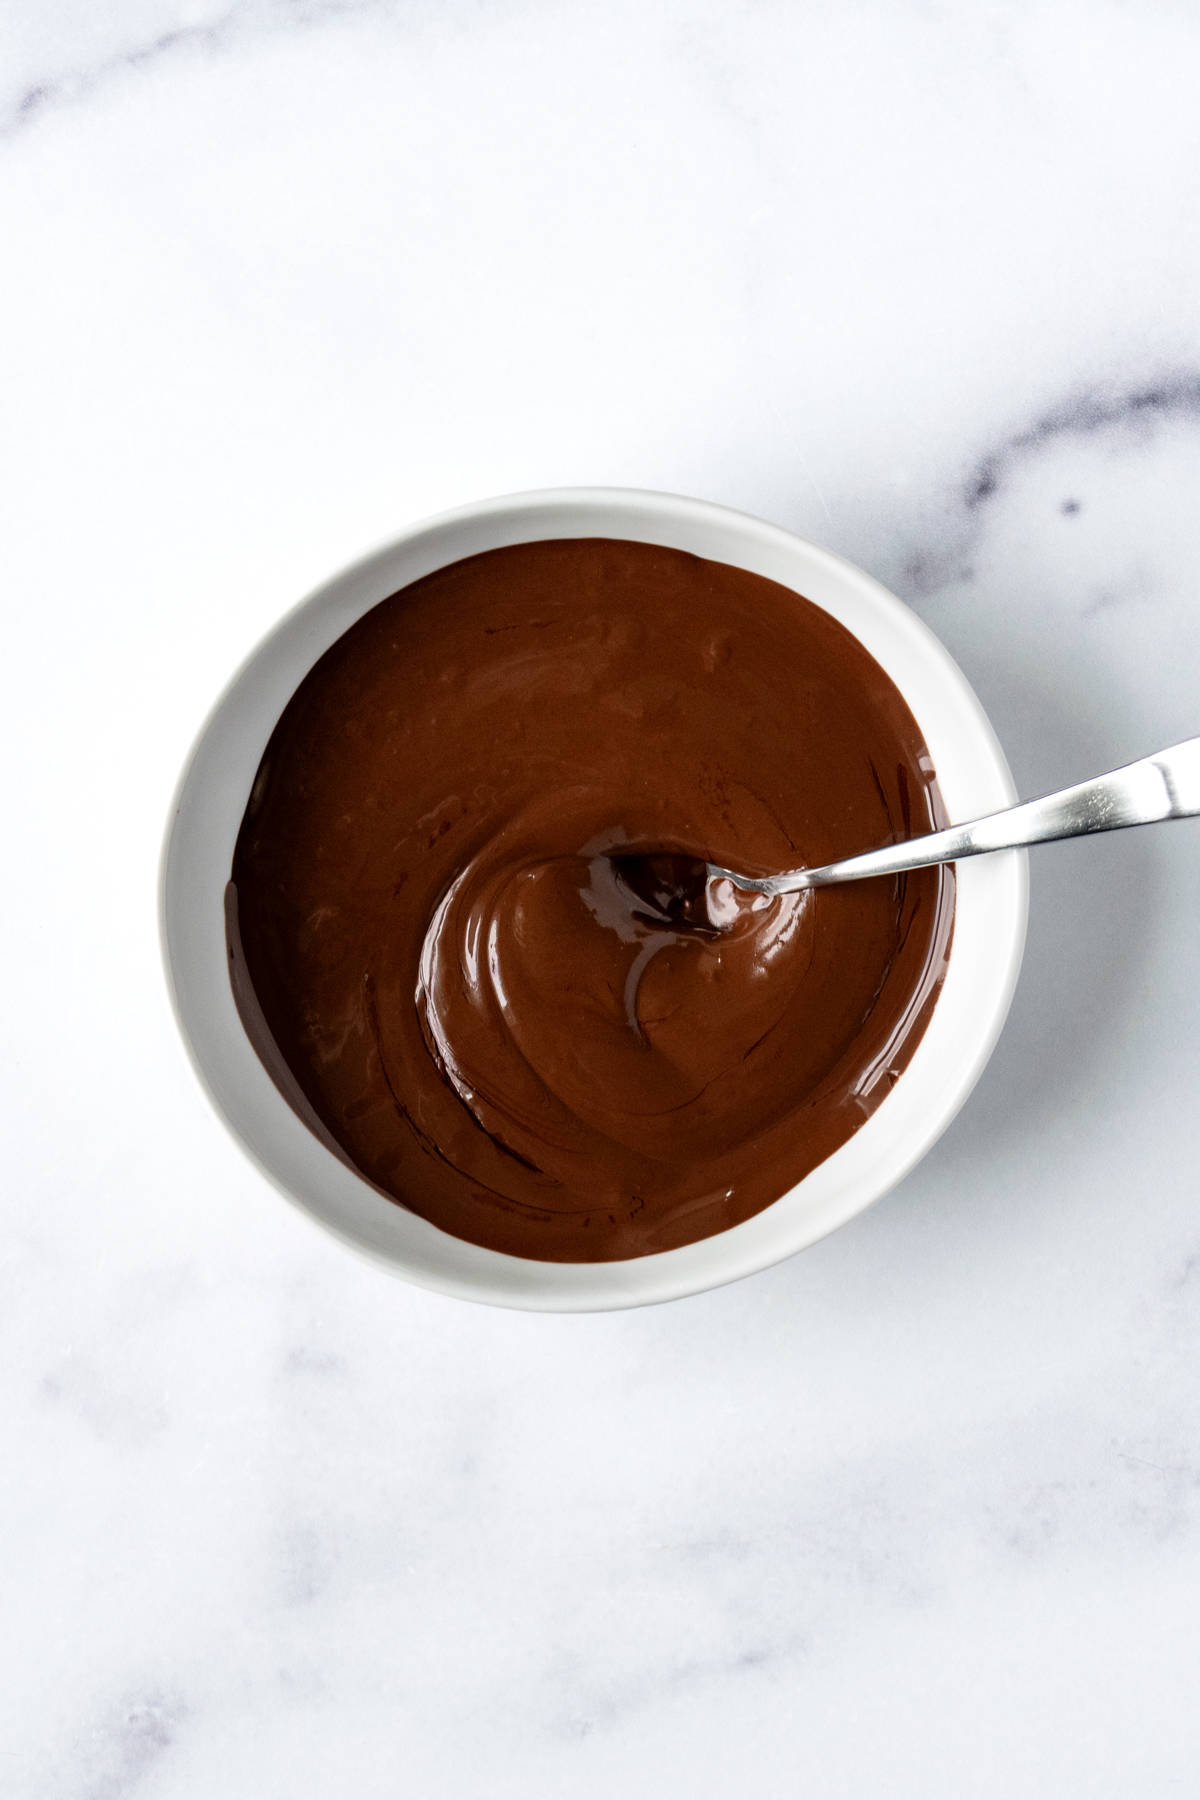 A white bowl of melted chocolate.